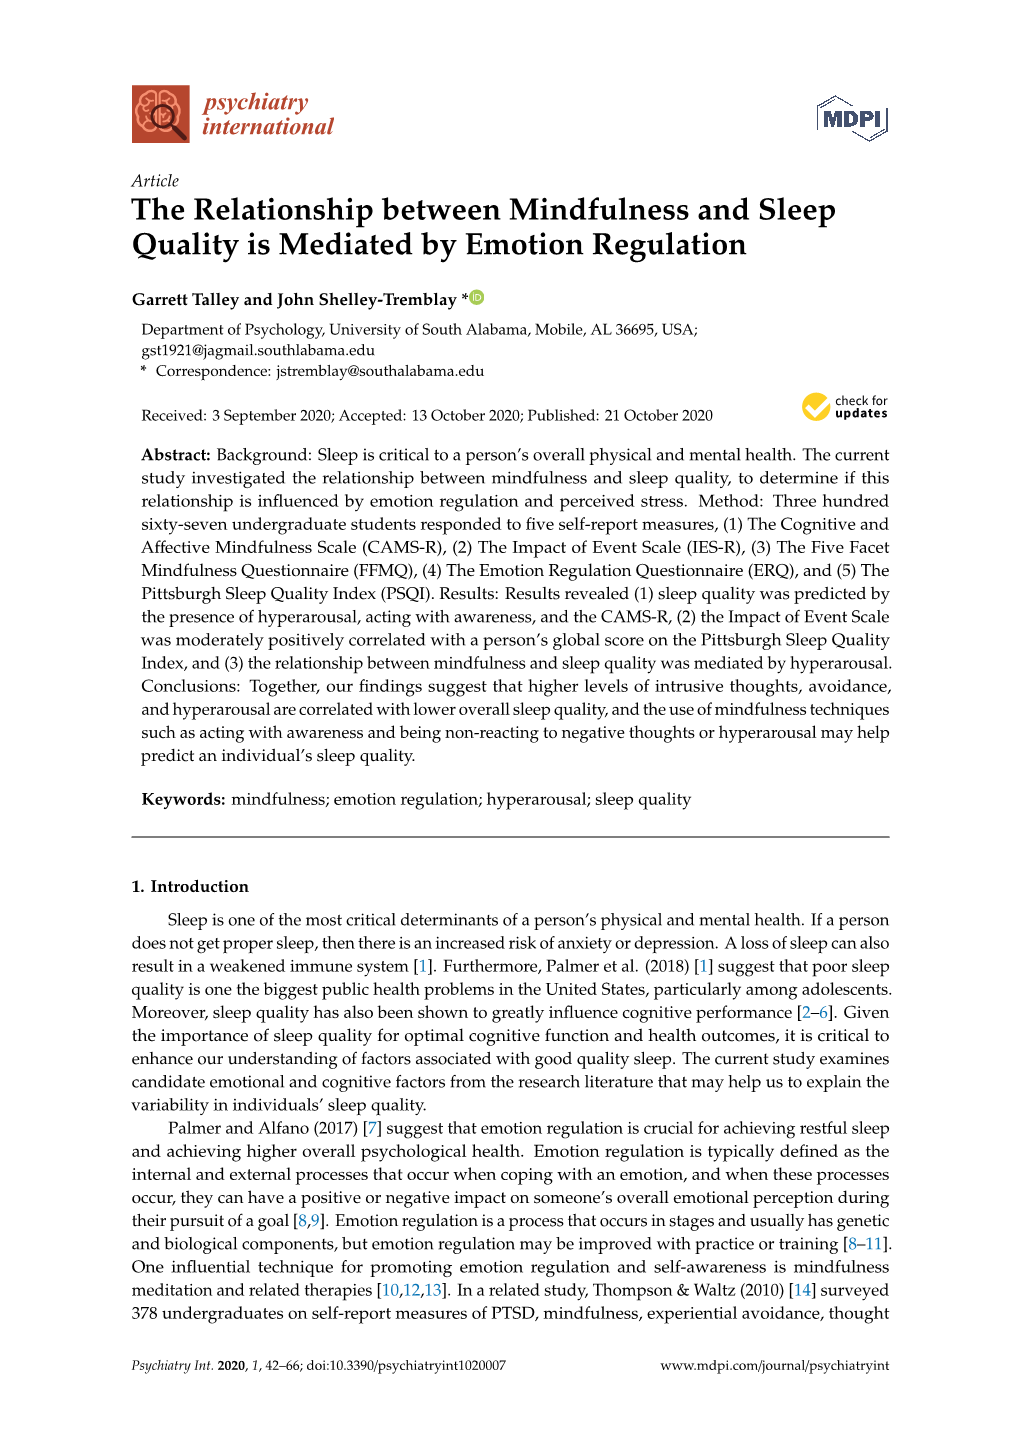 The Relationship Between Mindfulness and Sleep Quality Is Mediated by Emotion Regulation